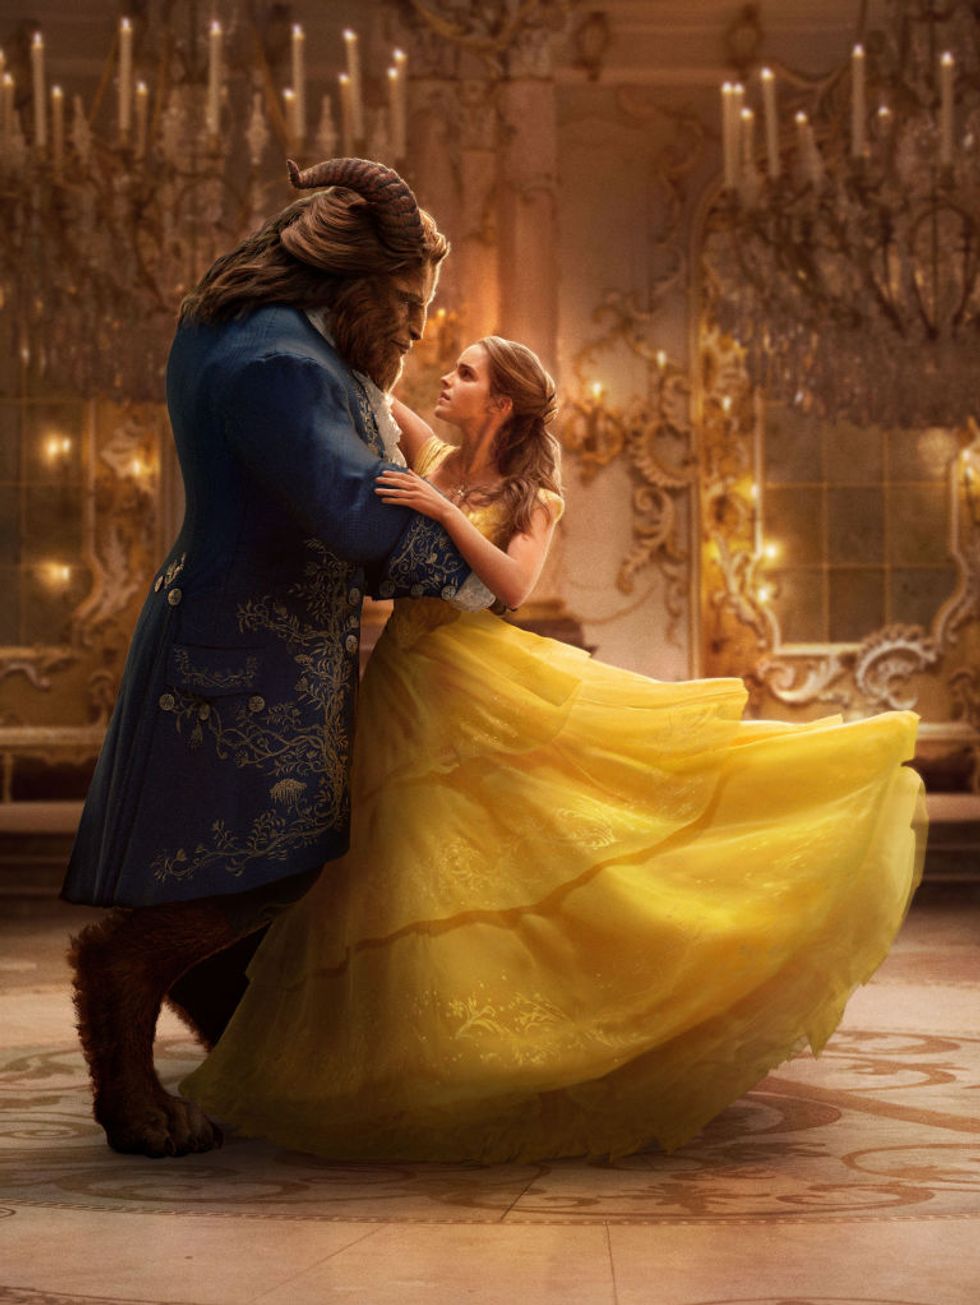 "Beauty and The Beast": Hit or Miss?